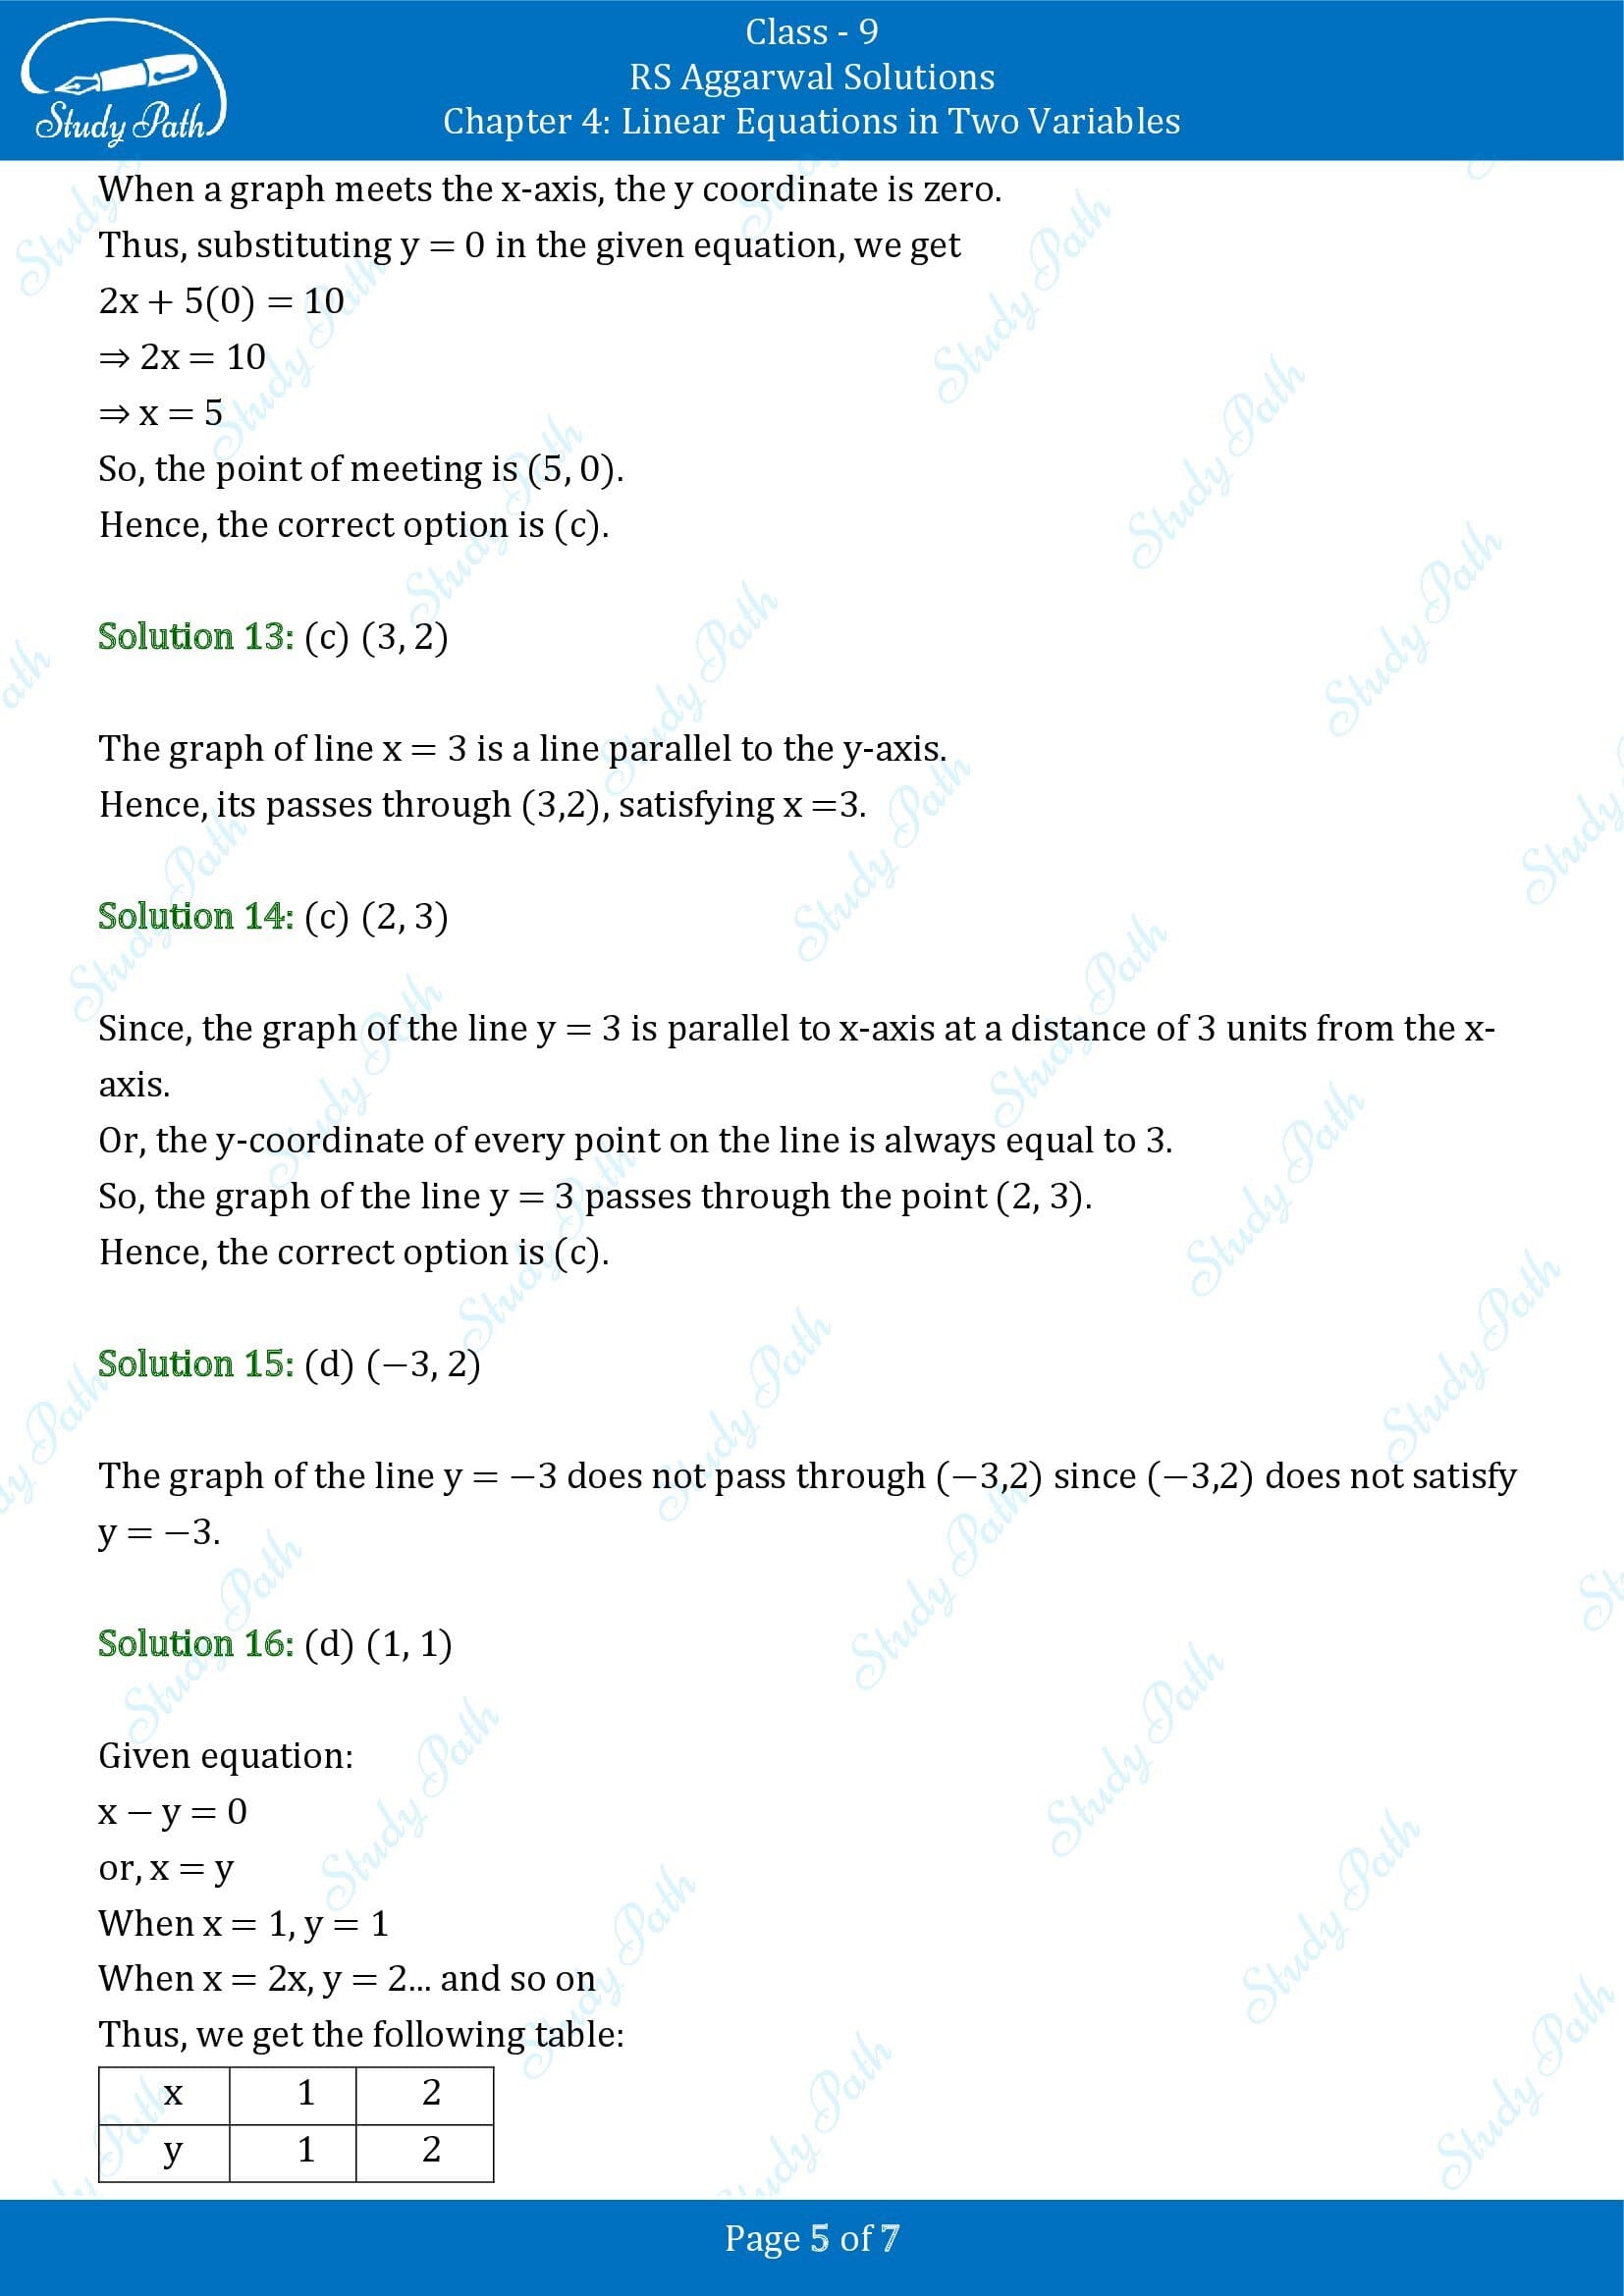 RS Aggarwal Solutions Class 9 Chapter 4 Linear Equations in Two Variables Multiple Choice Questions MCQs 00005